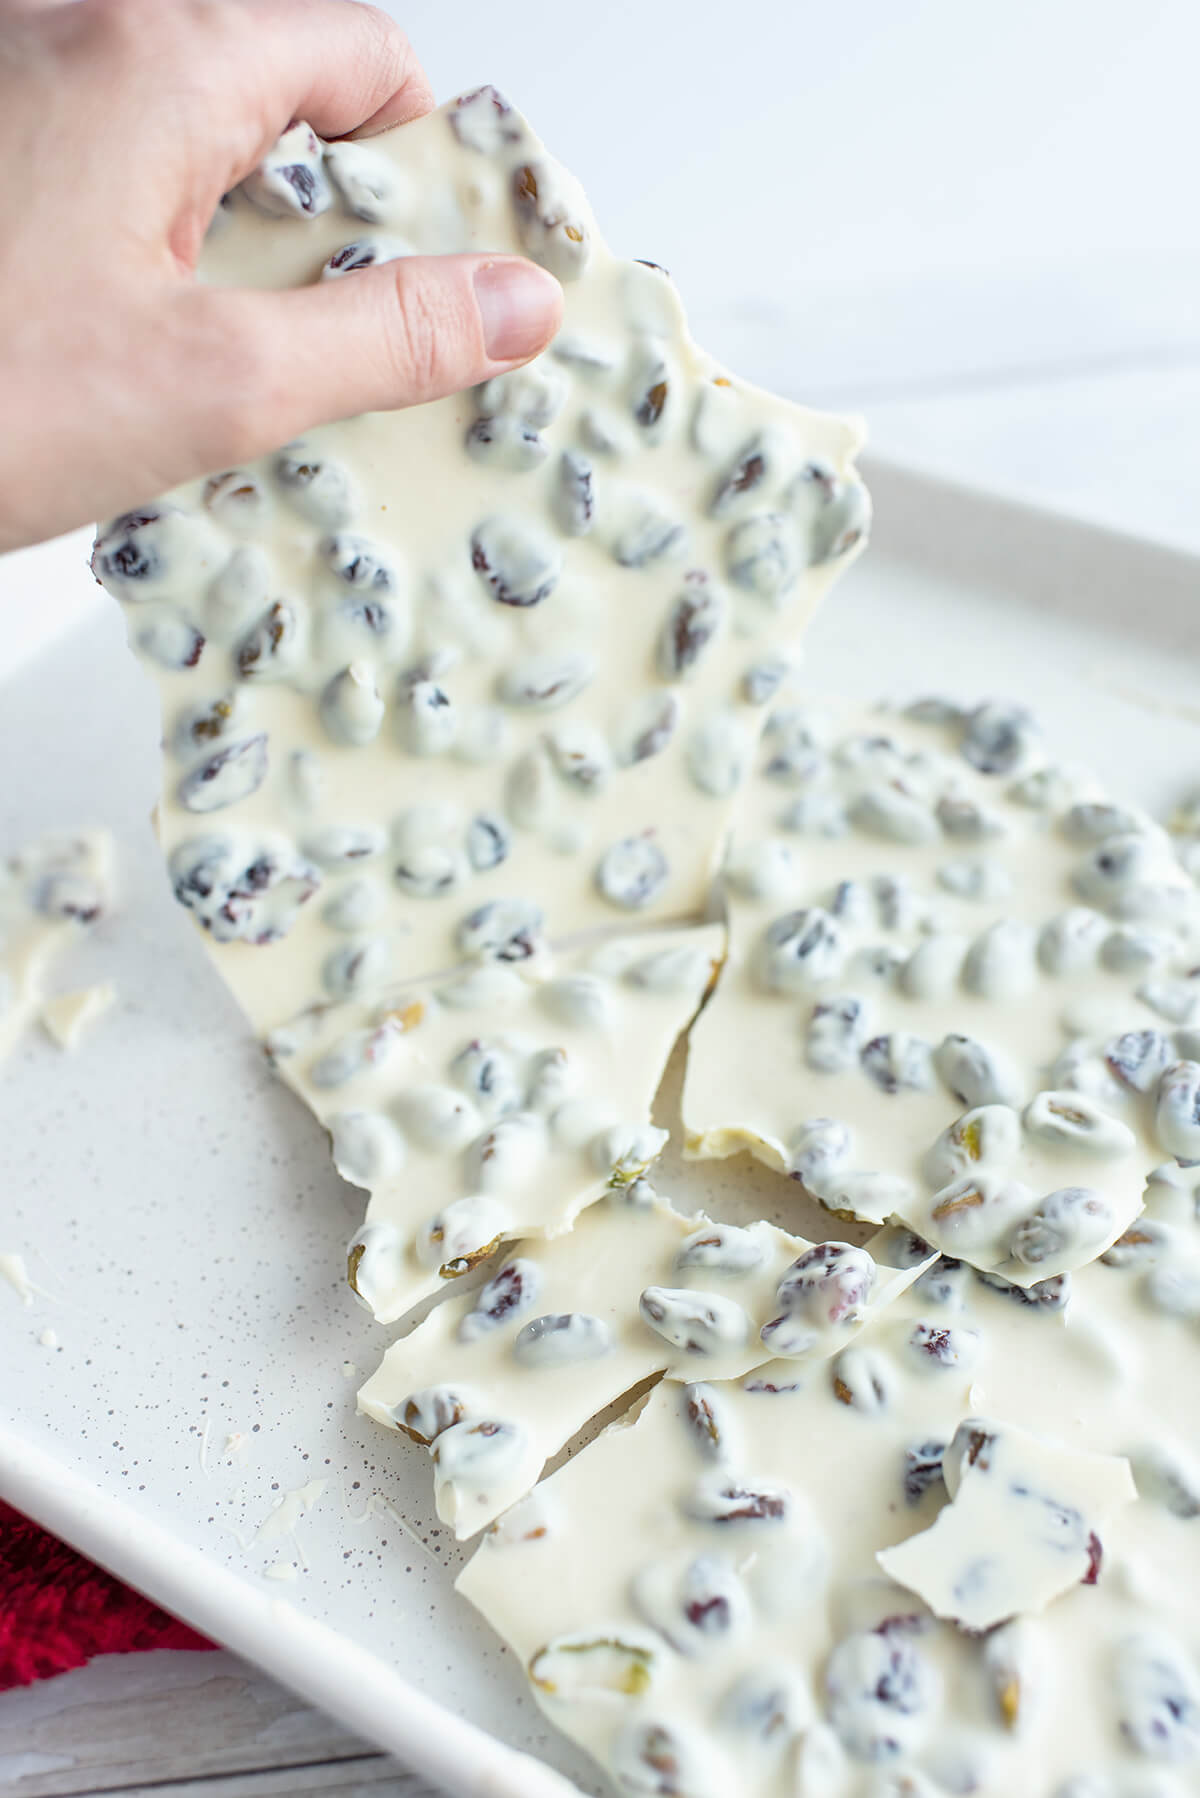 Breaking white chocolate bark into pieces.